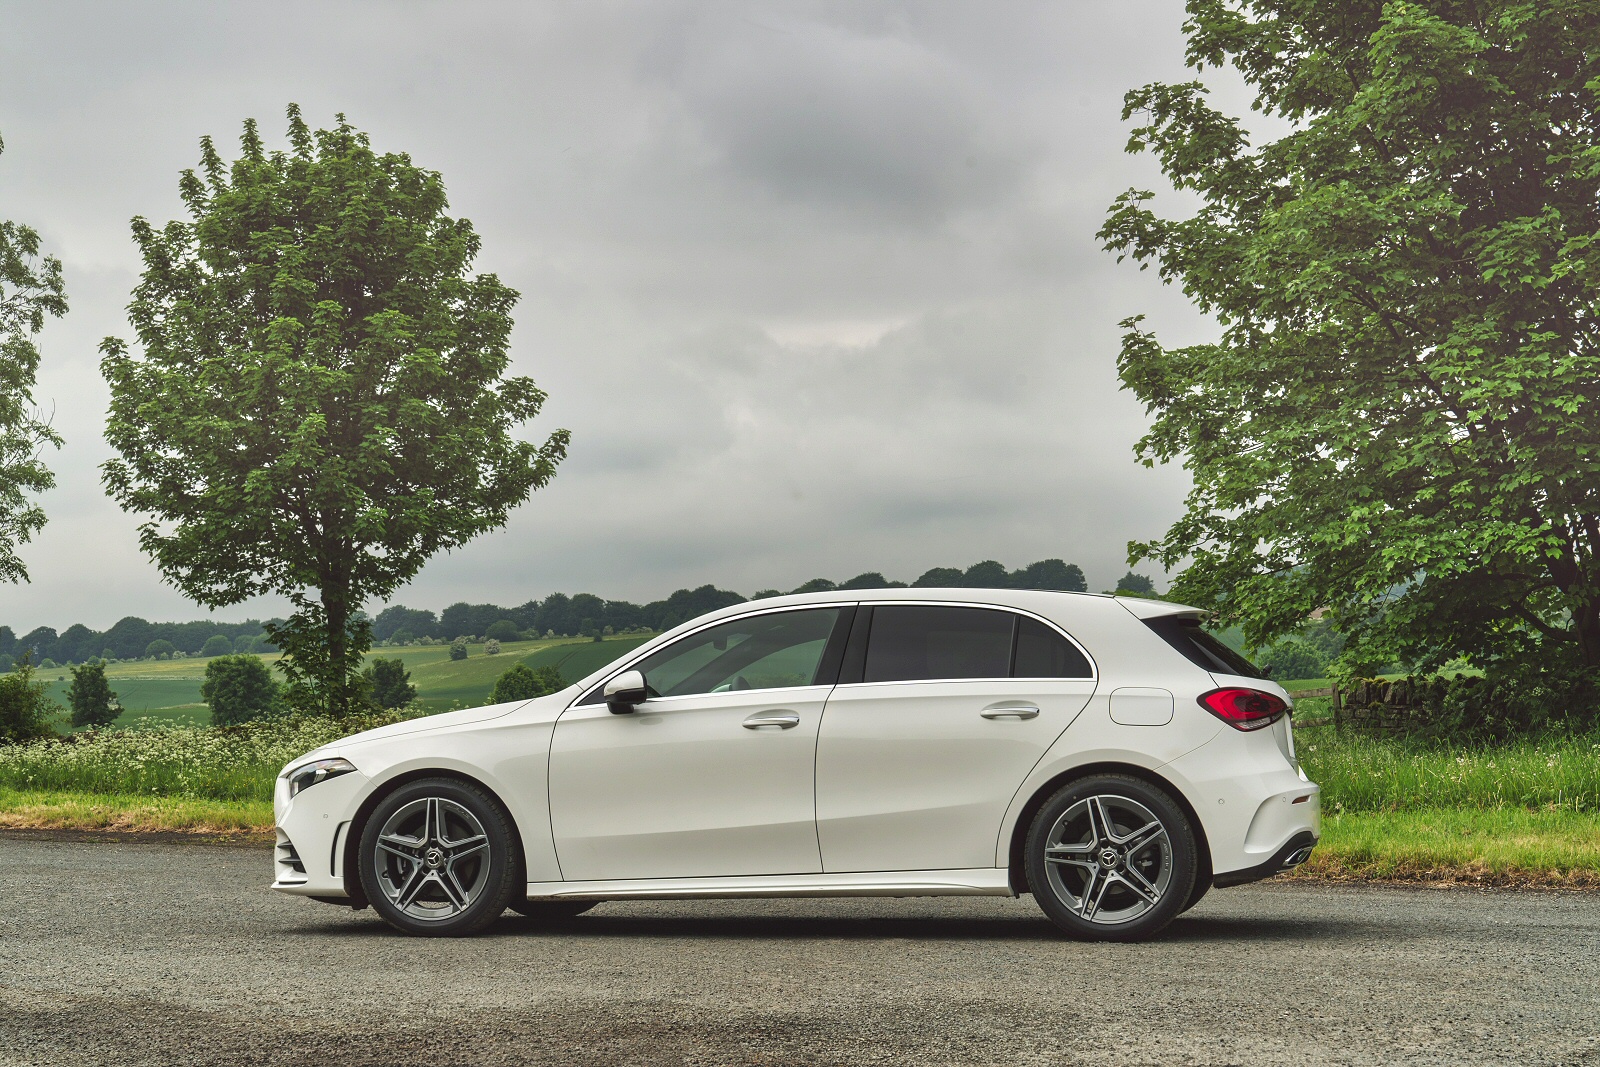 MERCEDES-BENZ A CLASS HATCHBACK SPECIAL EDITIONS A200 AMG Line Executive Edition 5dr Auto